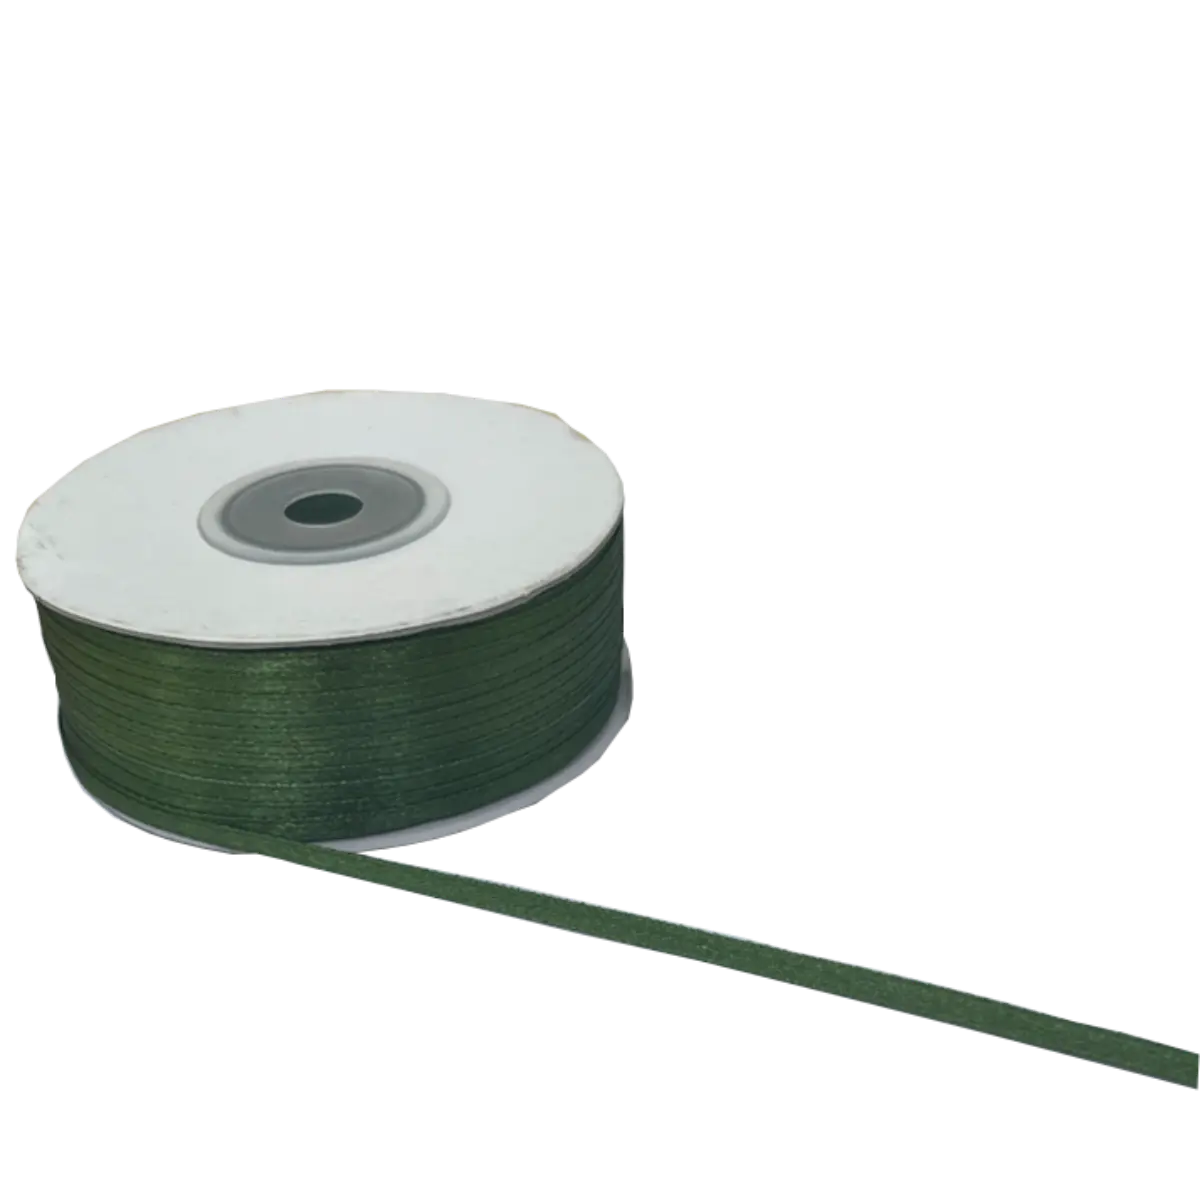 Olive Green Double Sided Satin Ribbons - 3mm Wide By 100mts